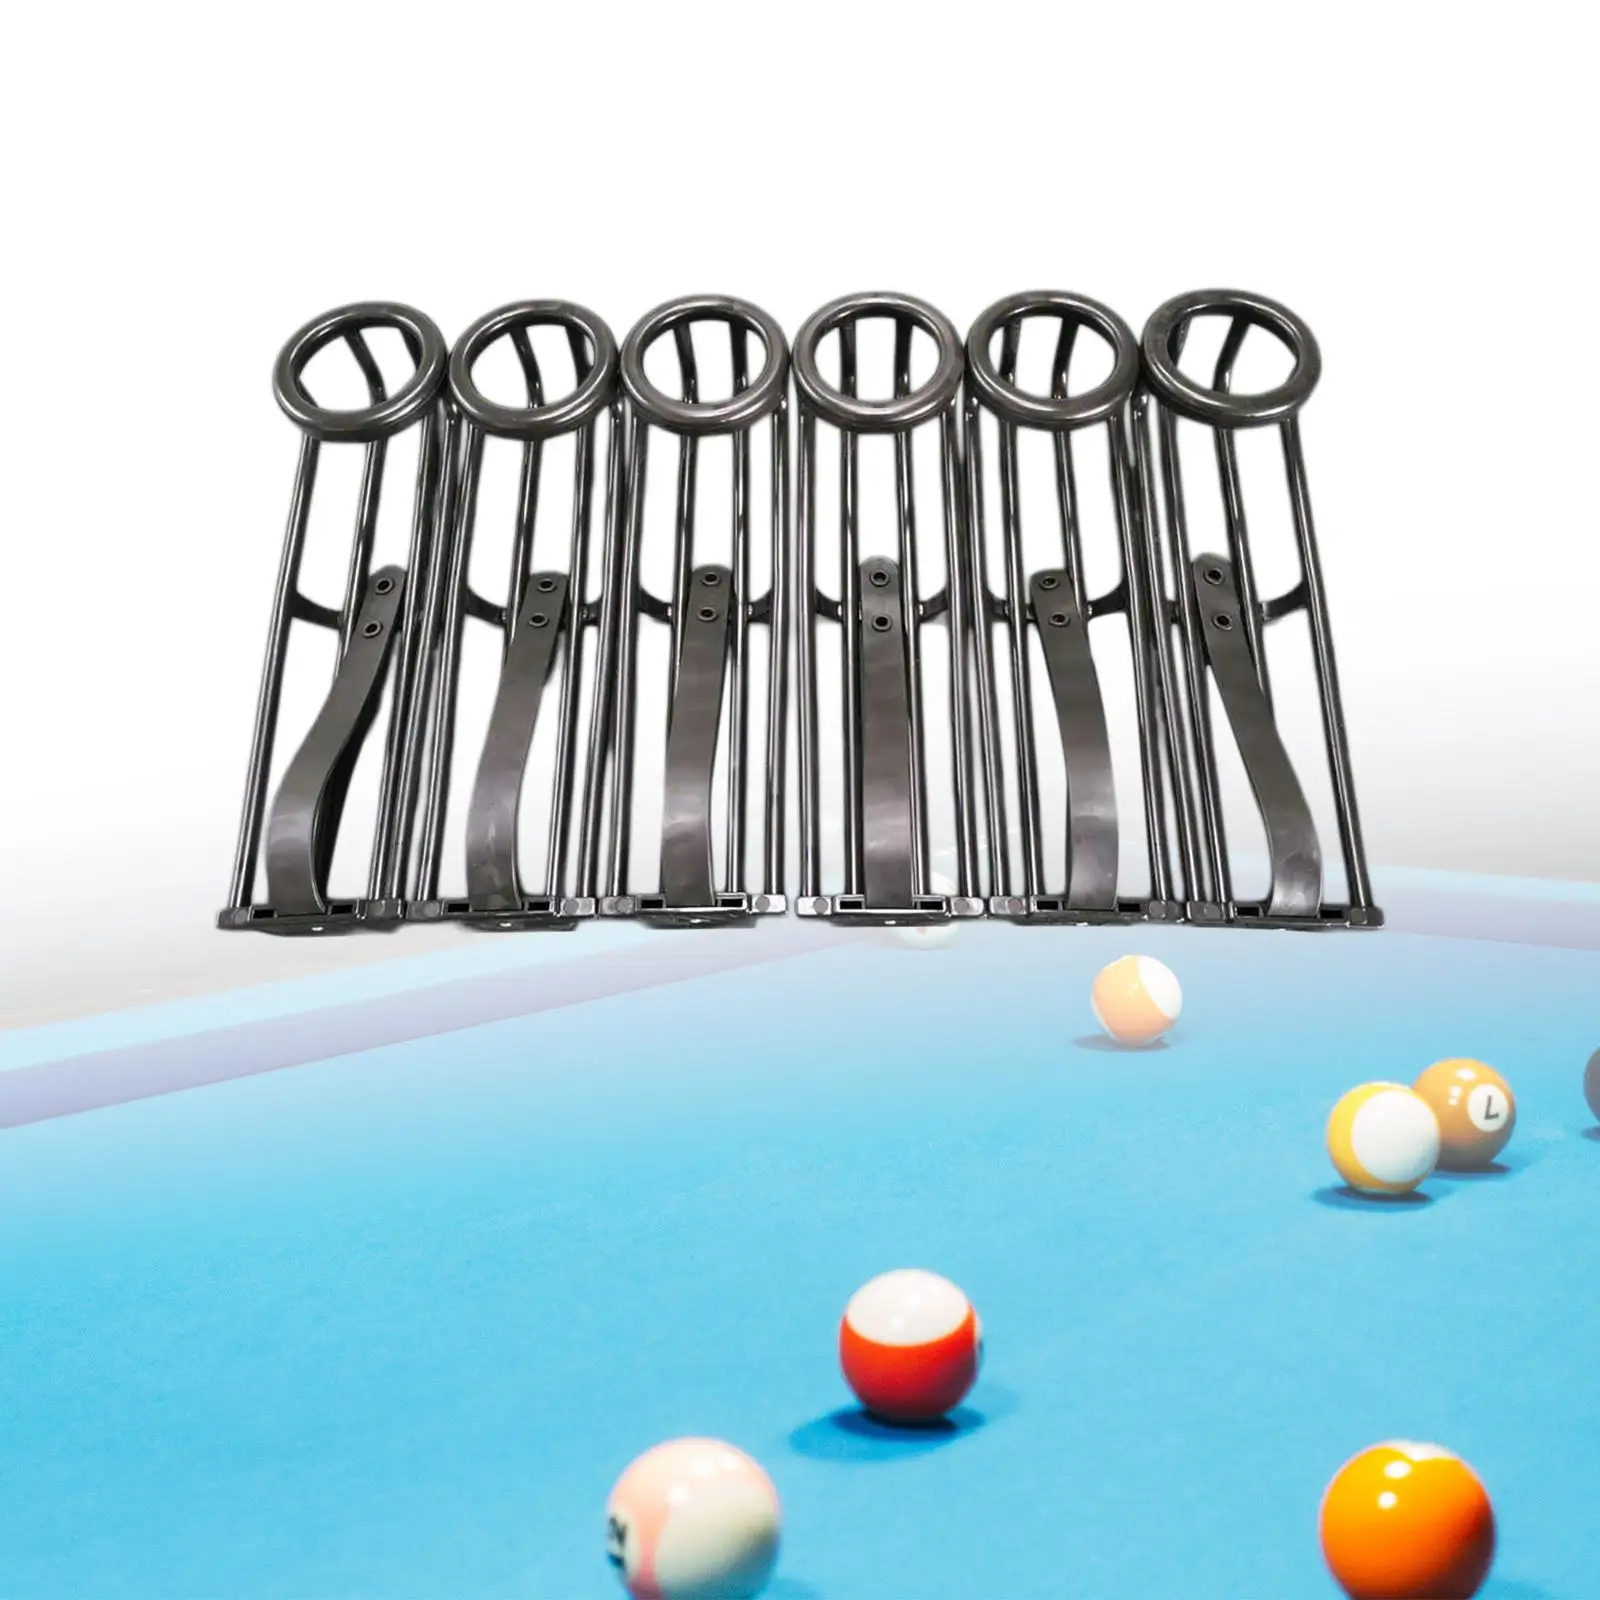 6Pcs Chinese Billiards Table Slide Track Replacement Supplies Entertainment Pool Snooker Accessories Billiards Table Pocket Rail